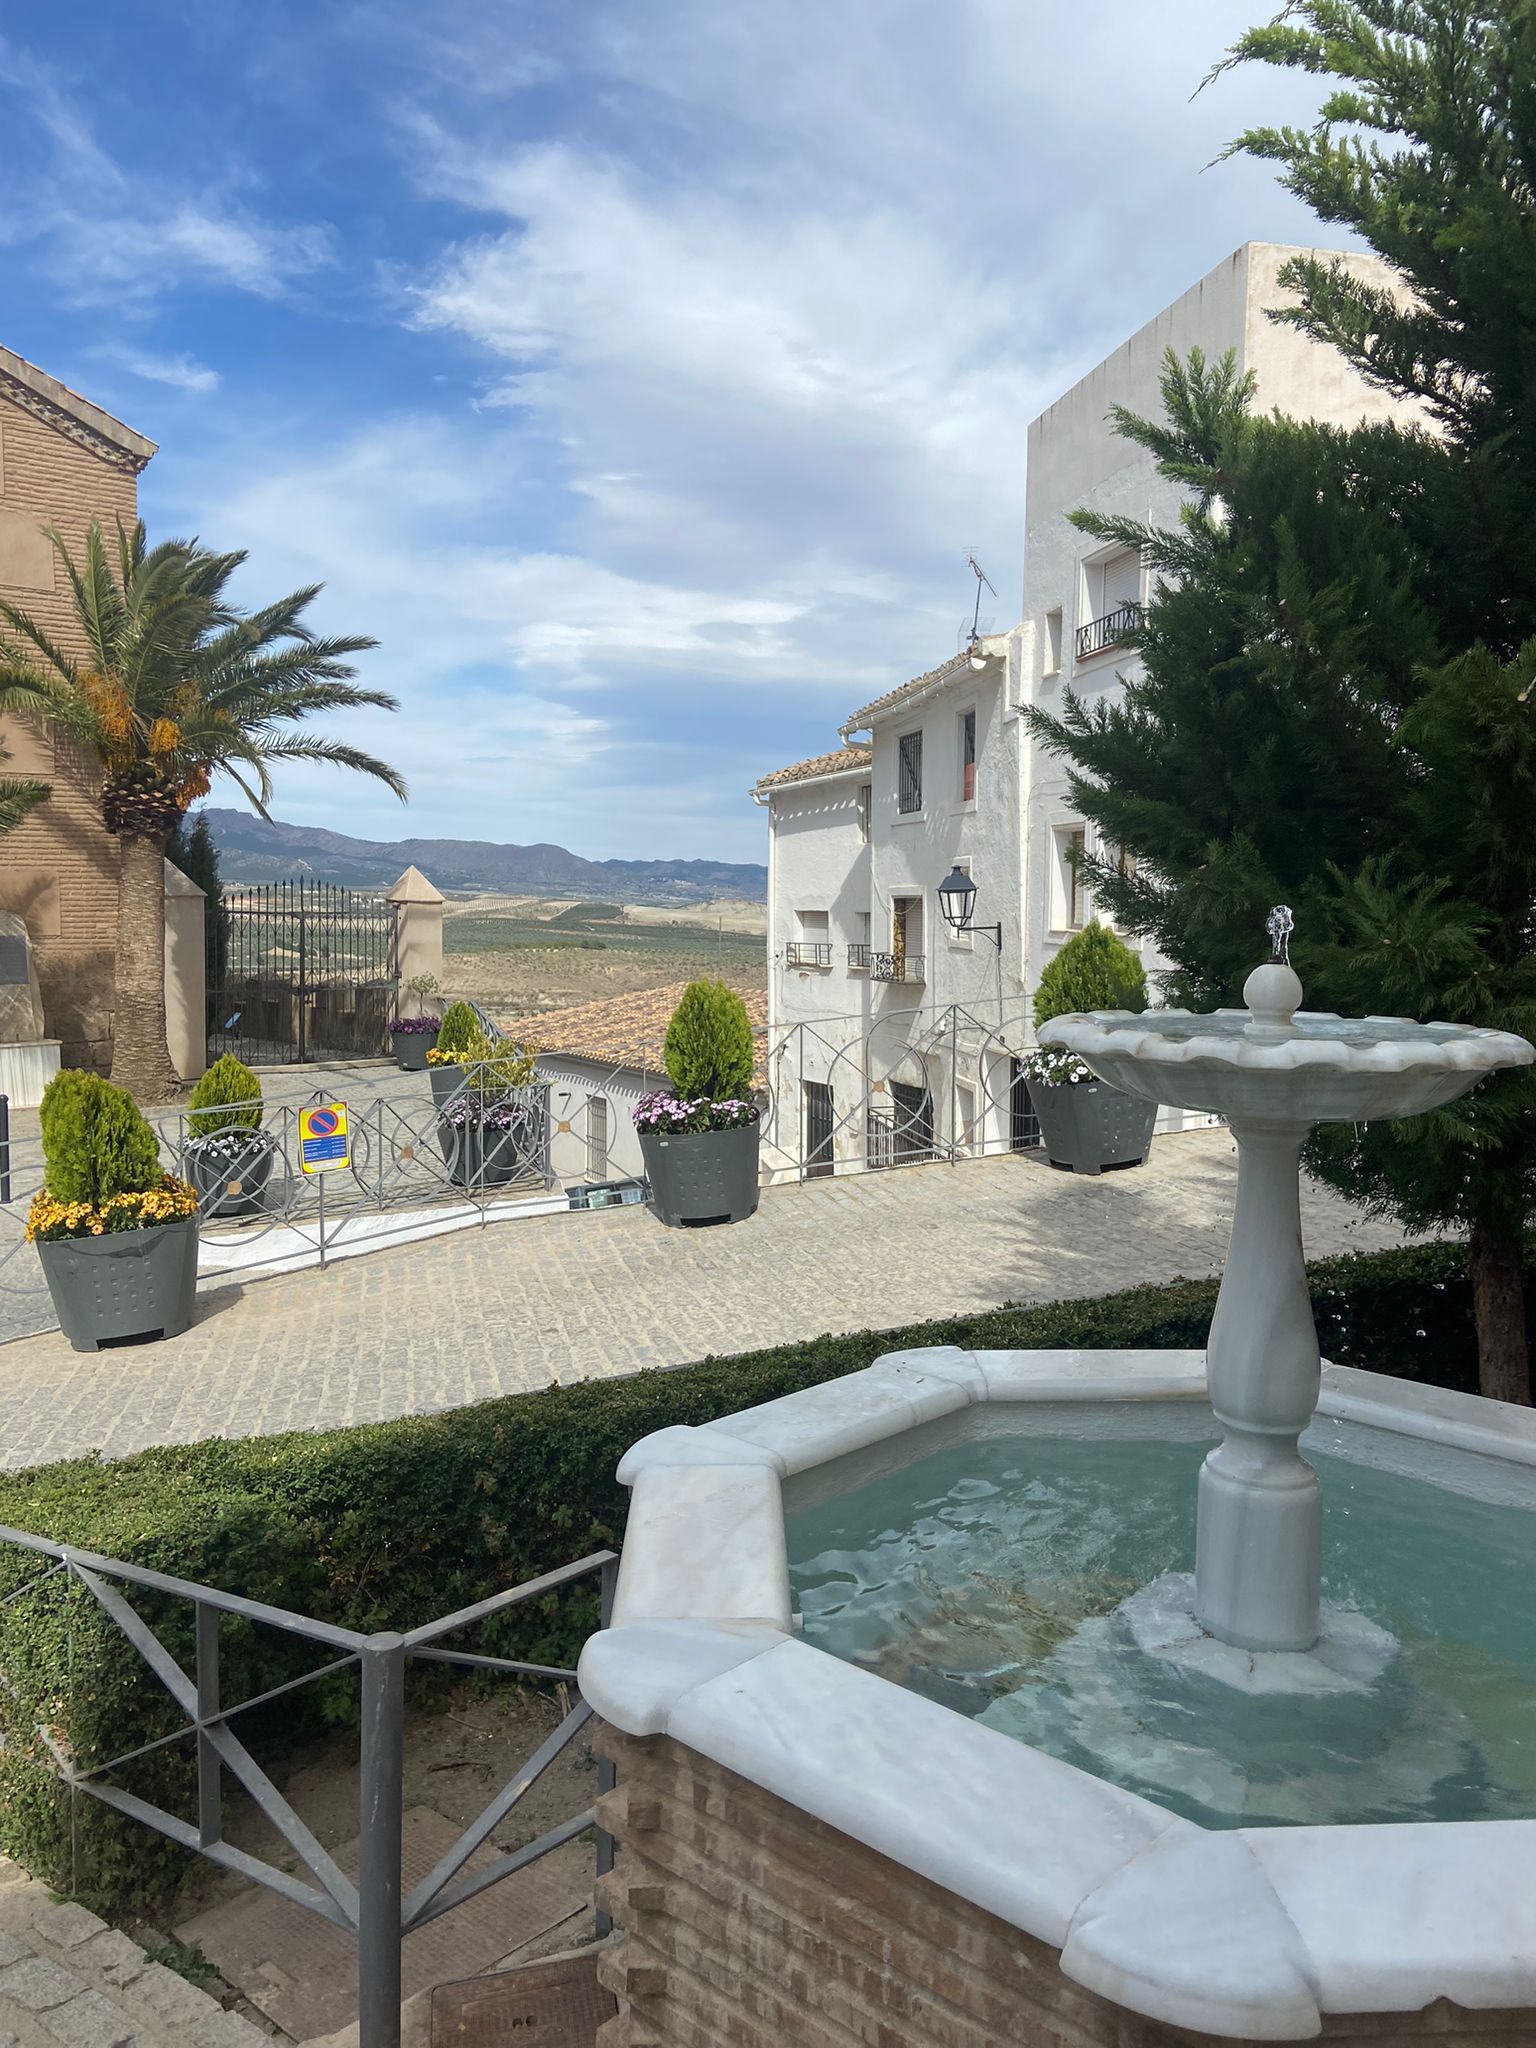 Relaxation and running retreats Old Mill Spain